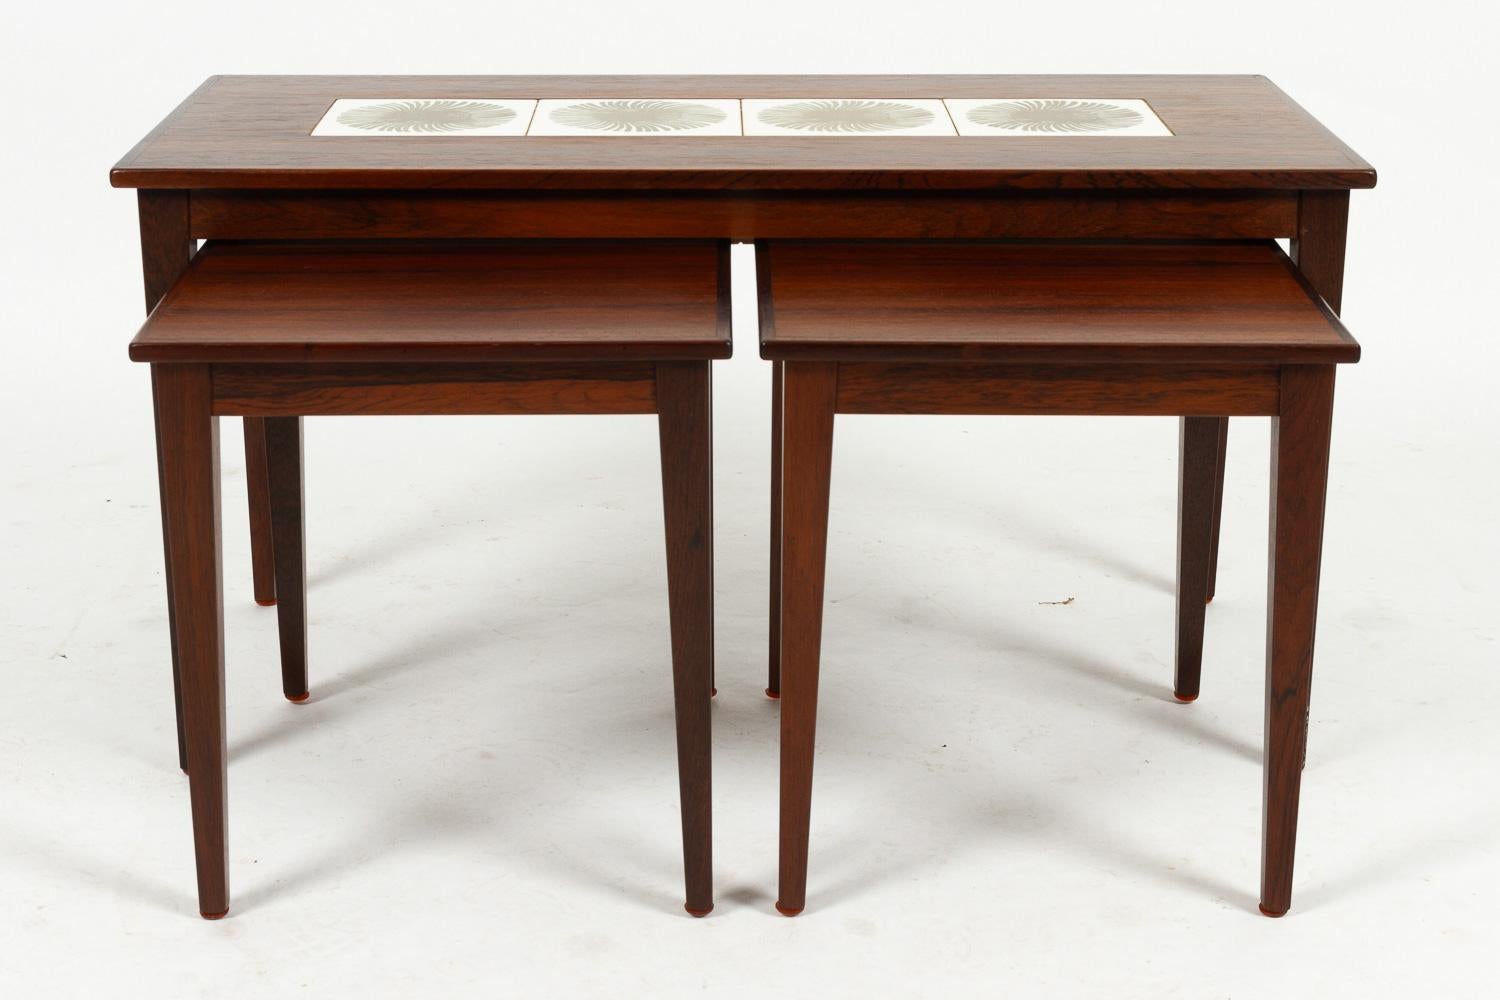 Danish Modern Rosewood & Ceramic Tile Nesting Tables, 1960s, Set of 3.
Set of three rosewood nesting tables by Kvalitet, Form & Funktion, Denmark. One large table, and two identical smaller tables that fit under the large one. The large table